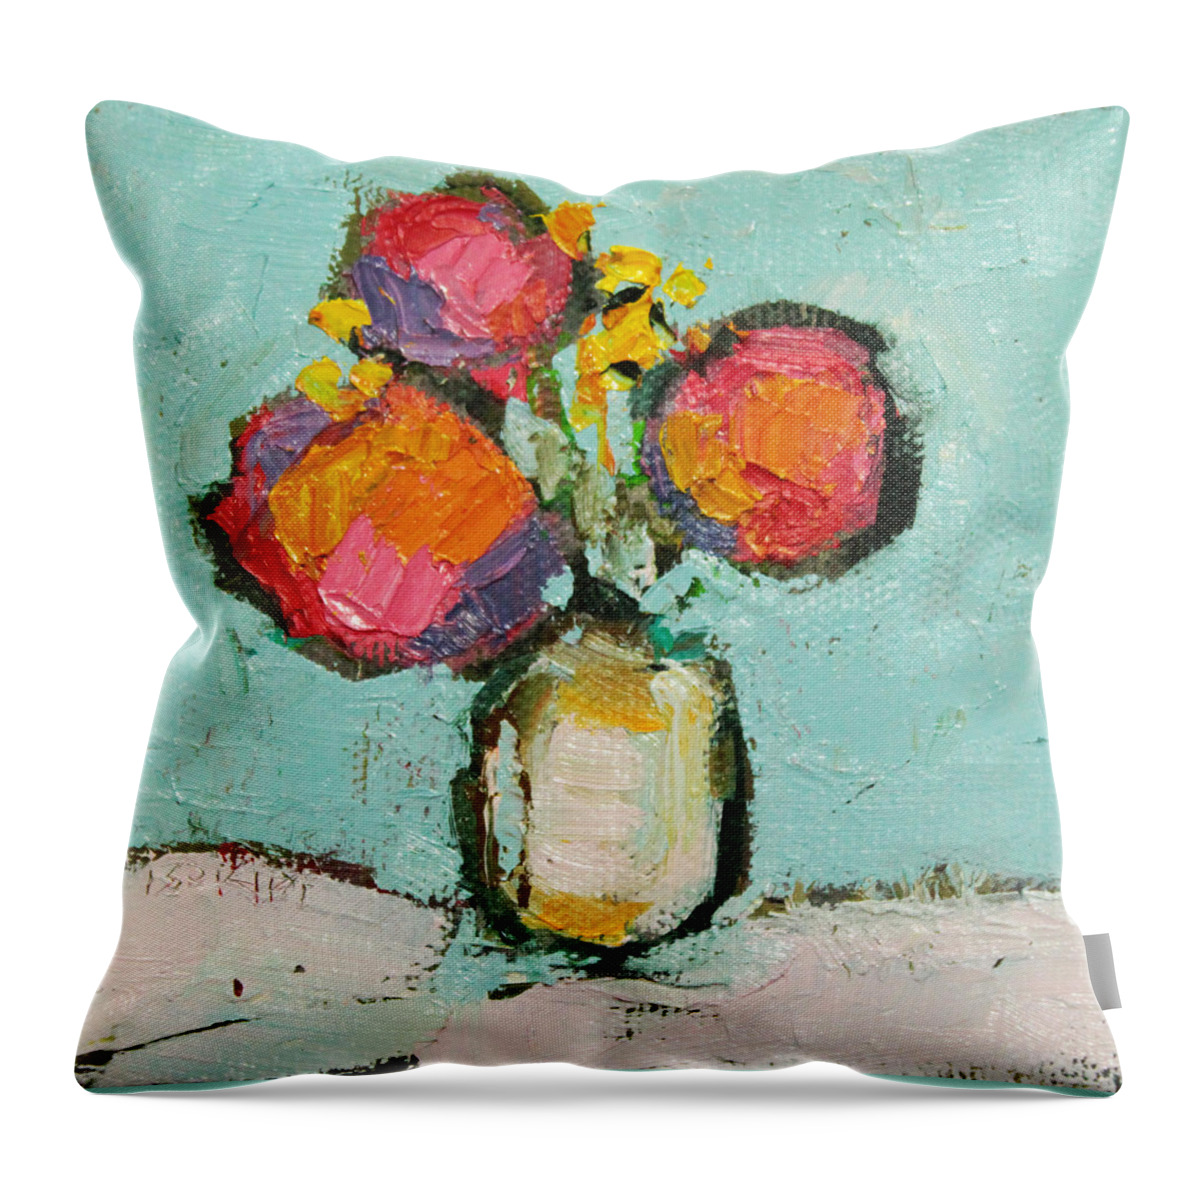 Oil Throw Pillow featuring the painting Sweet Flowers by Becky Kim